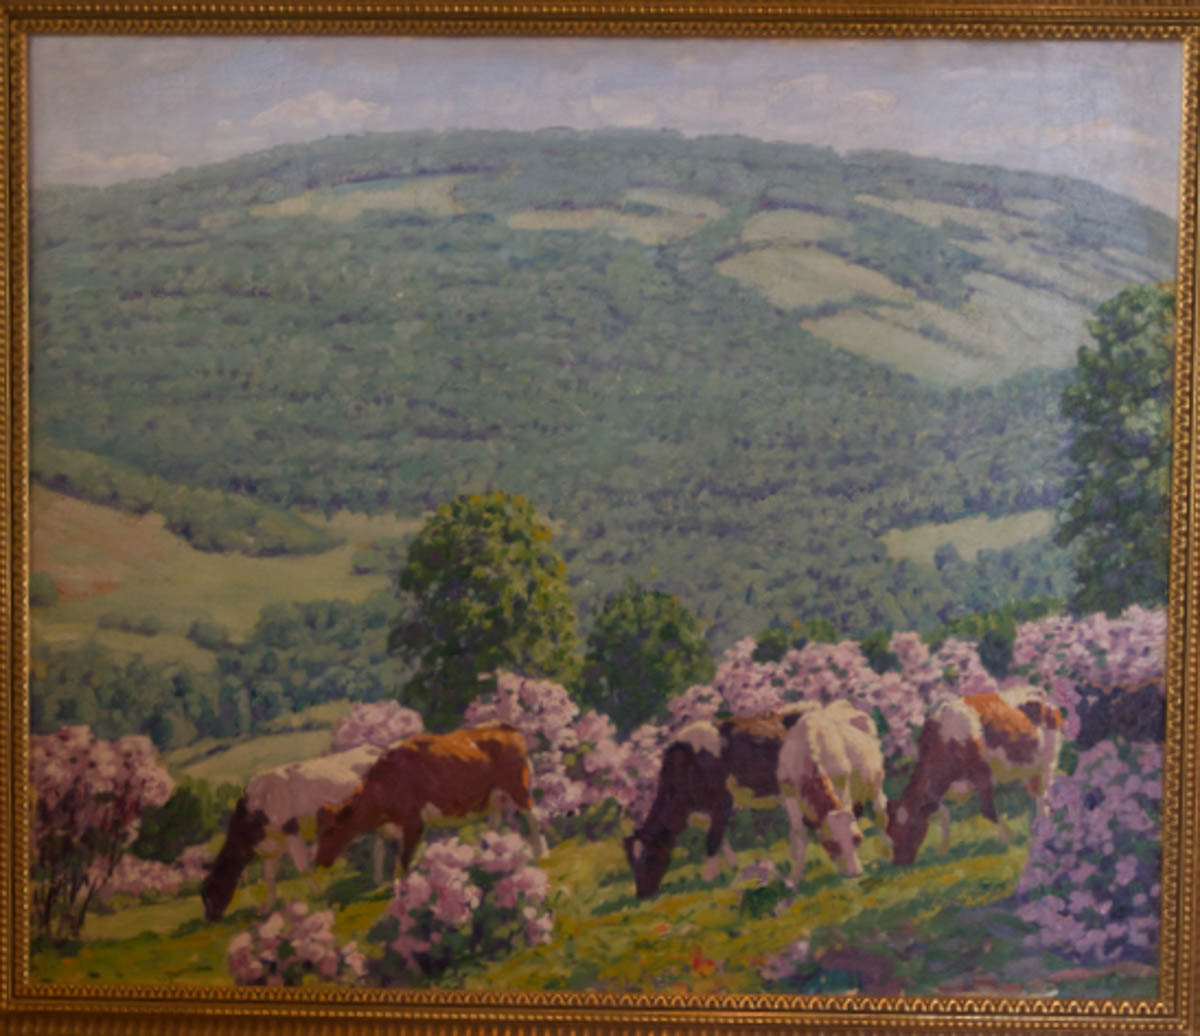 Untitled [Cows grazing amid mountain laurel in Catskills]